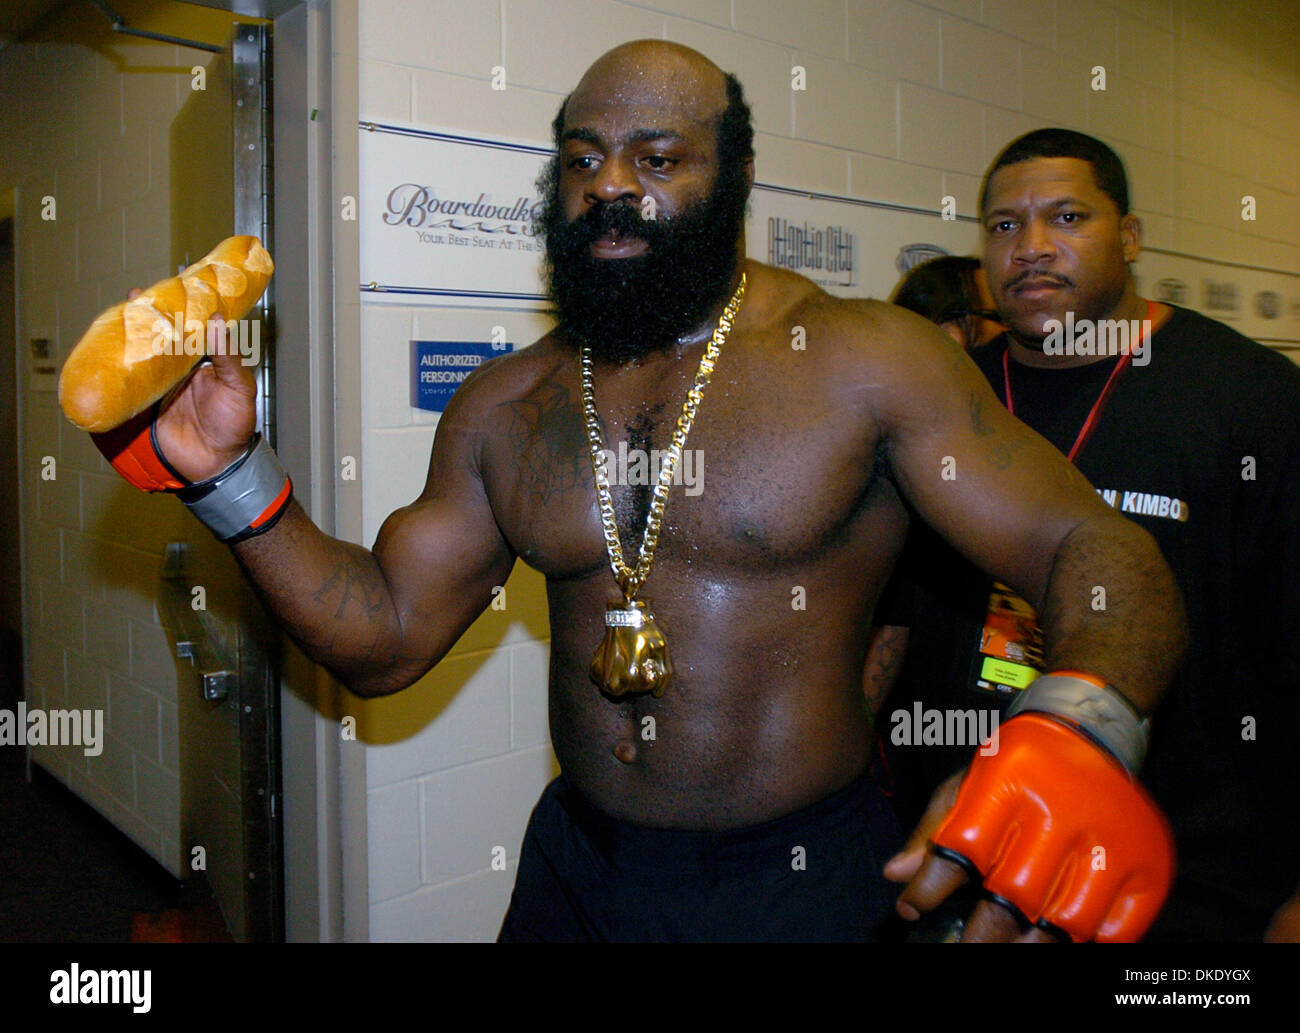 Ray Kimbo Slice Jun 24, 2007 - Atlantic City, NJ, USA - KIMBO SLICE carries a loaf of bread  following his victory in the Heavyweight Fight. Kimbo Slice defeats Ray  Mercer with a 1st Round